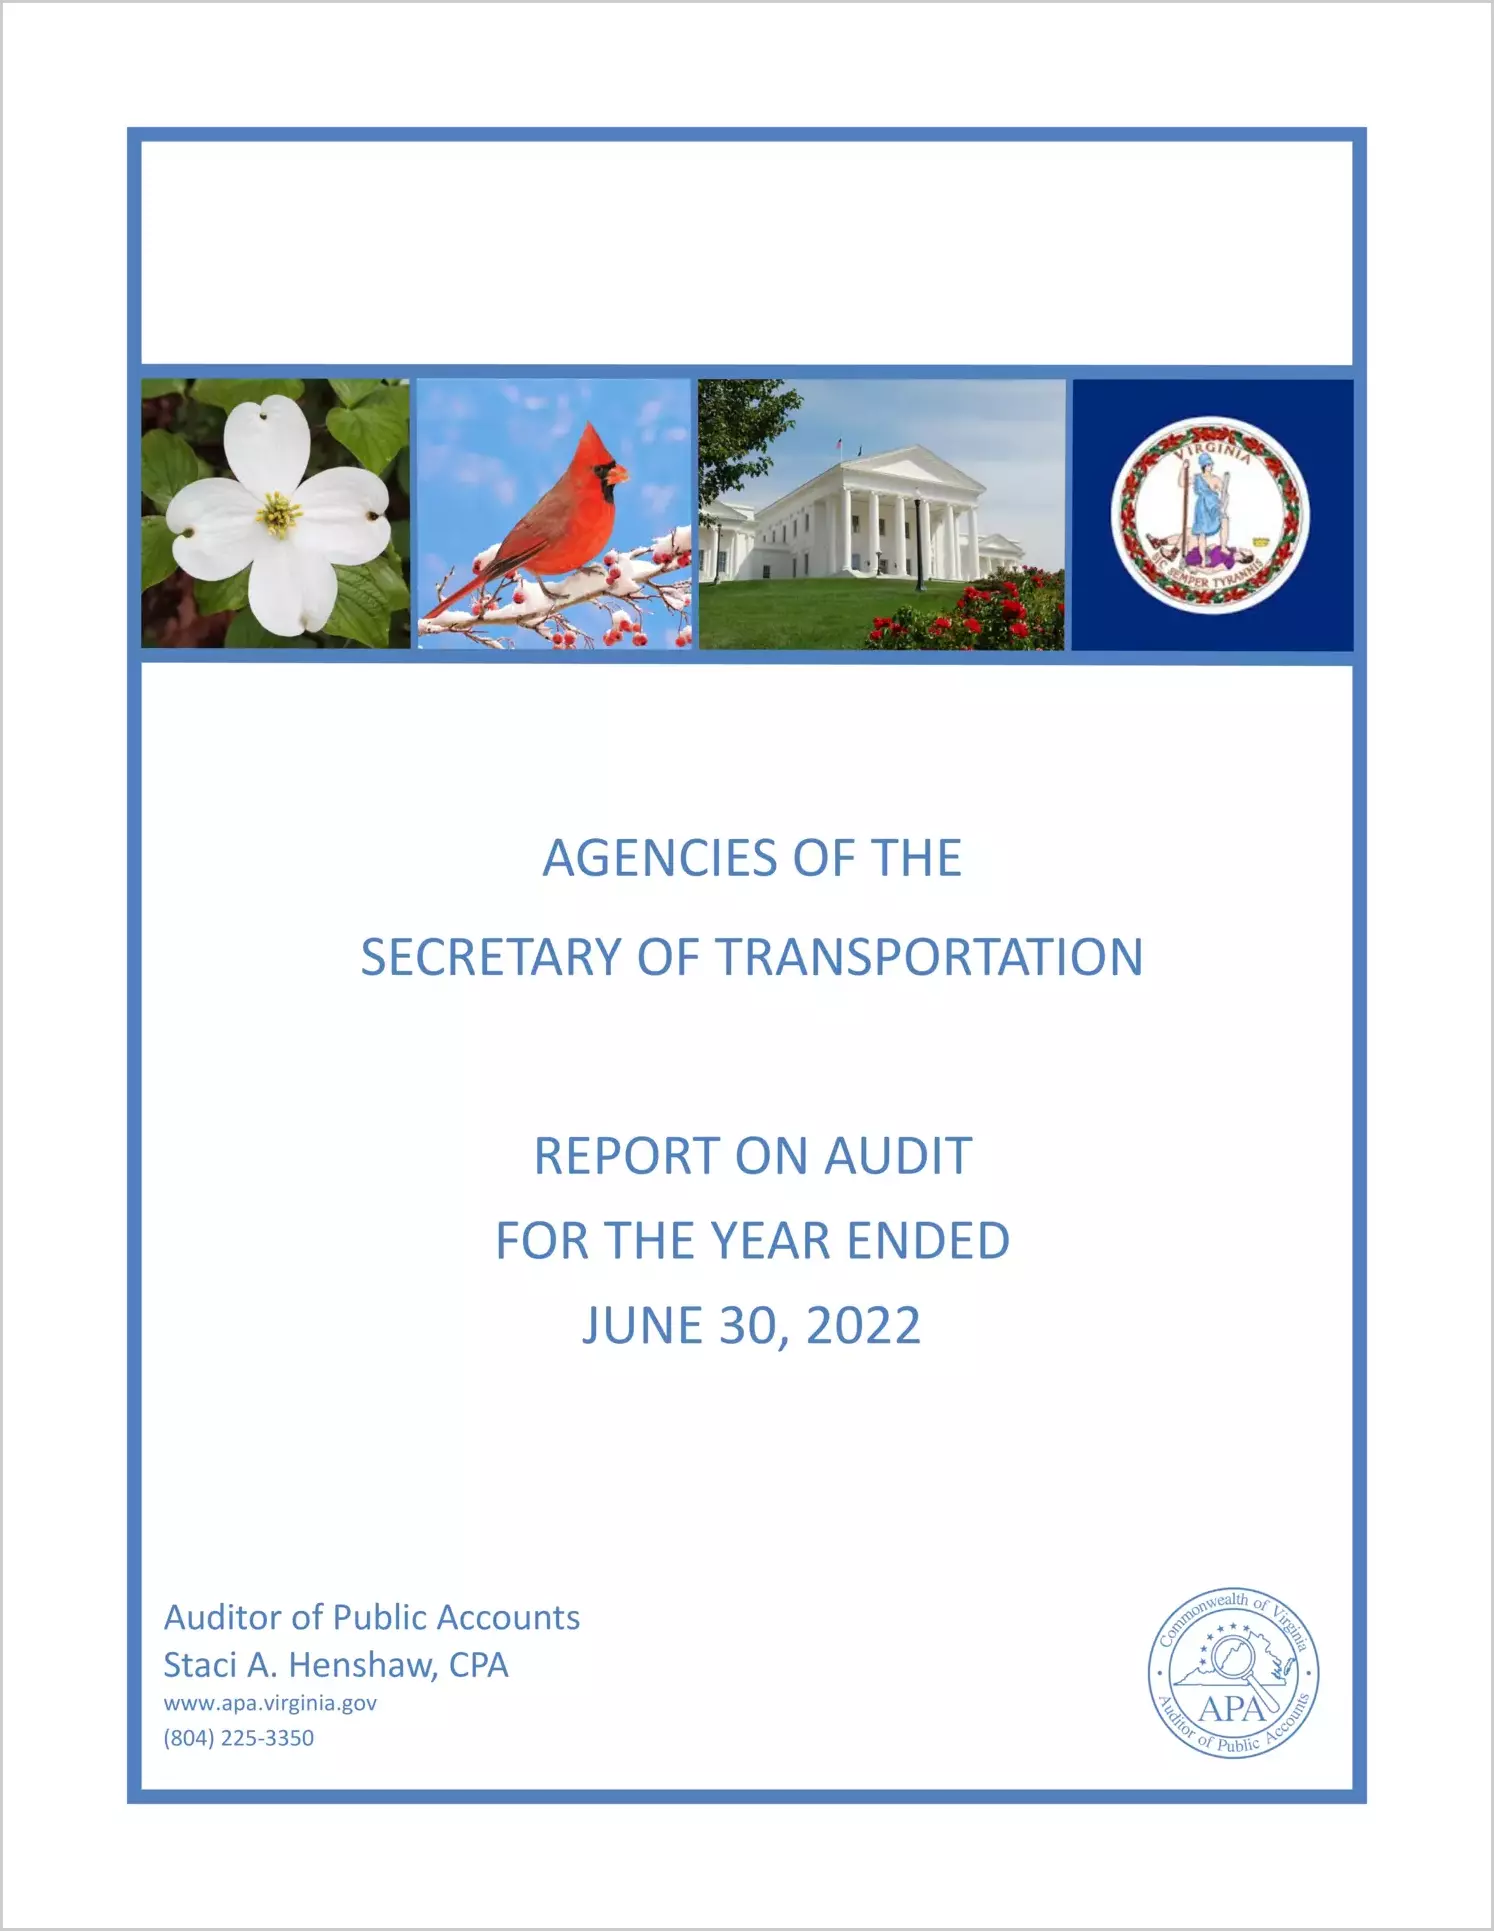 Agencies of the Secretary of Transportation for the year ended June 30, 2022